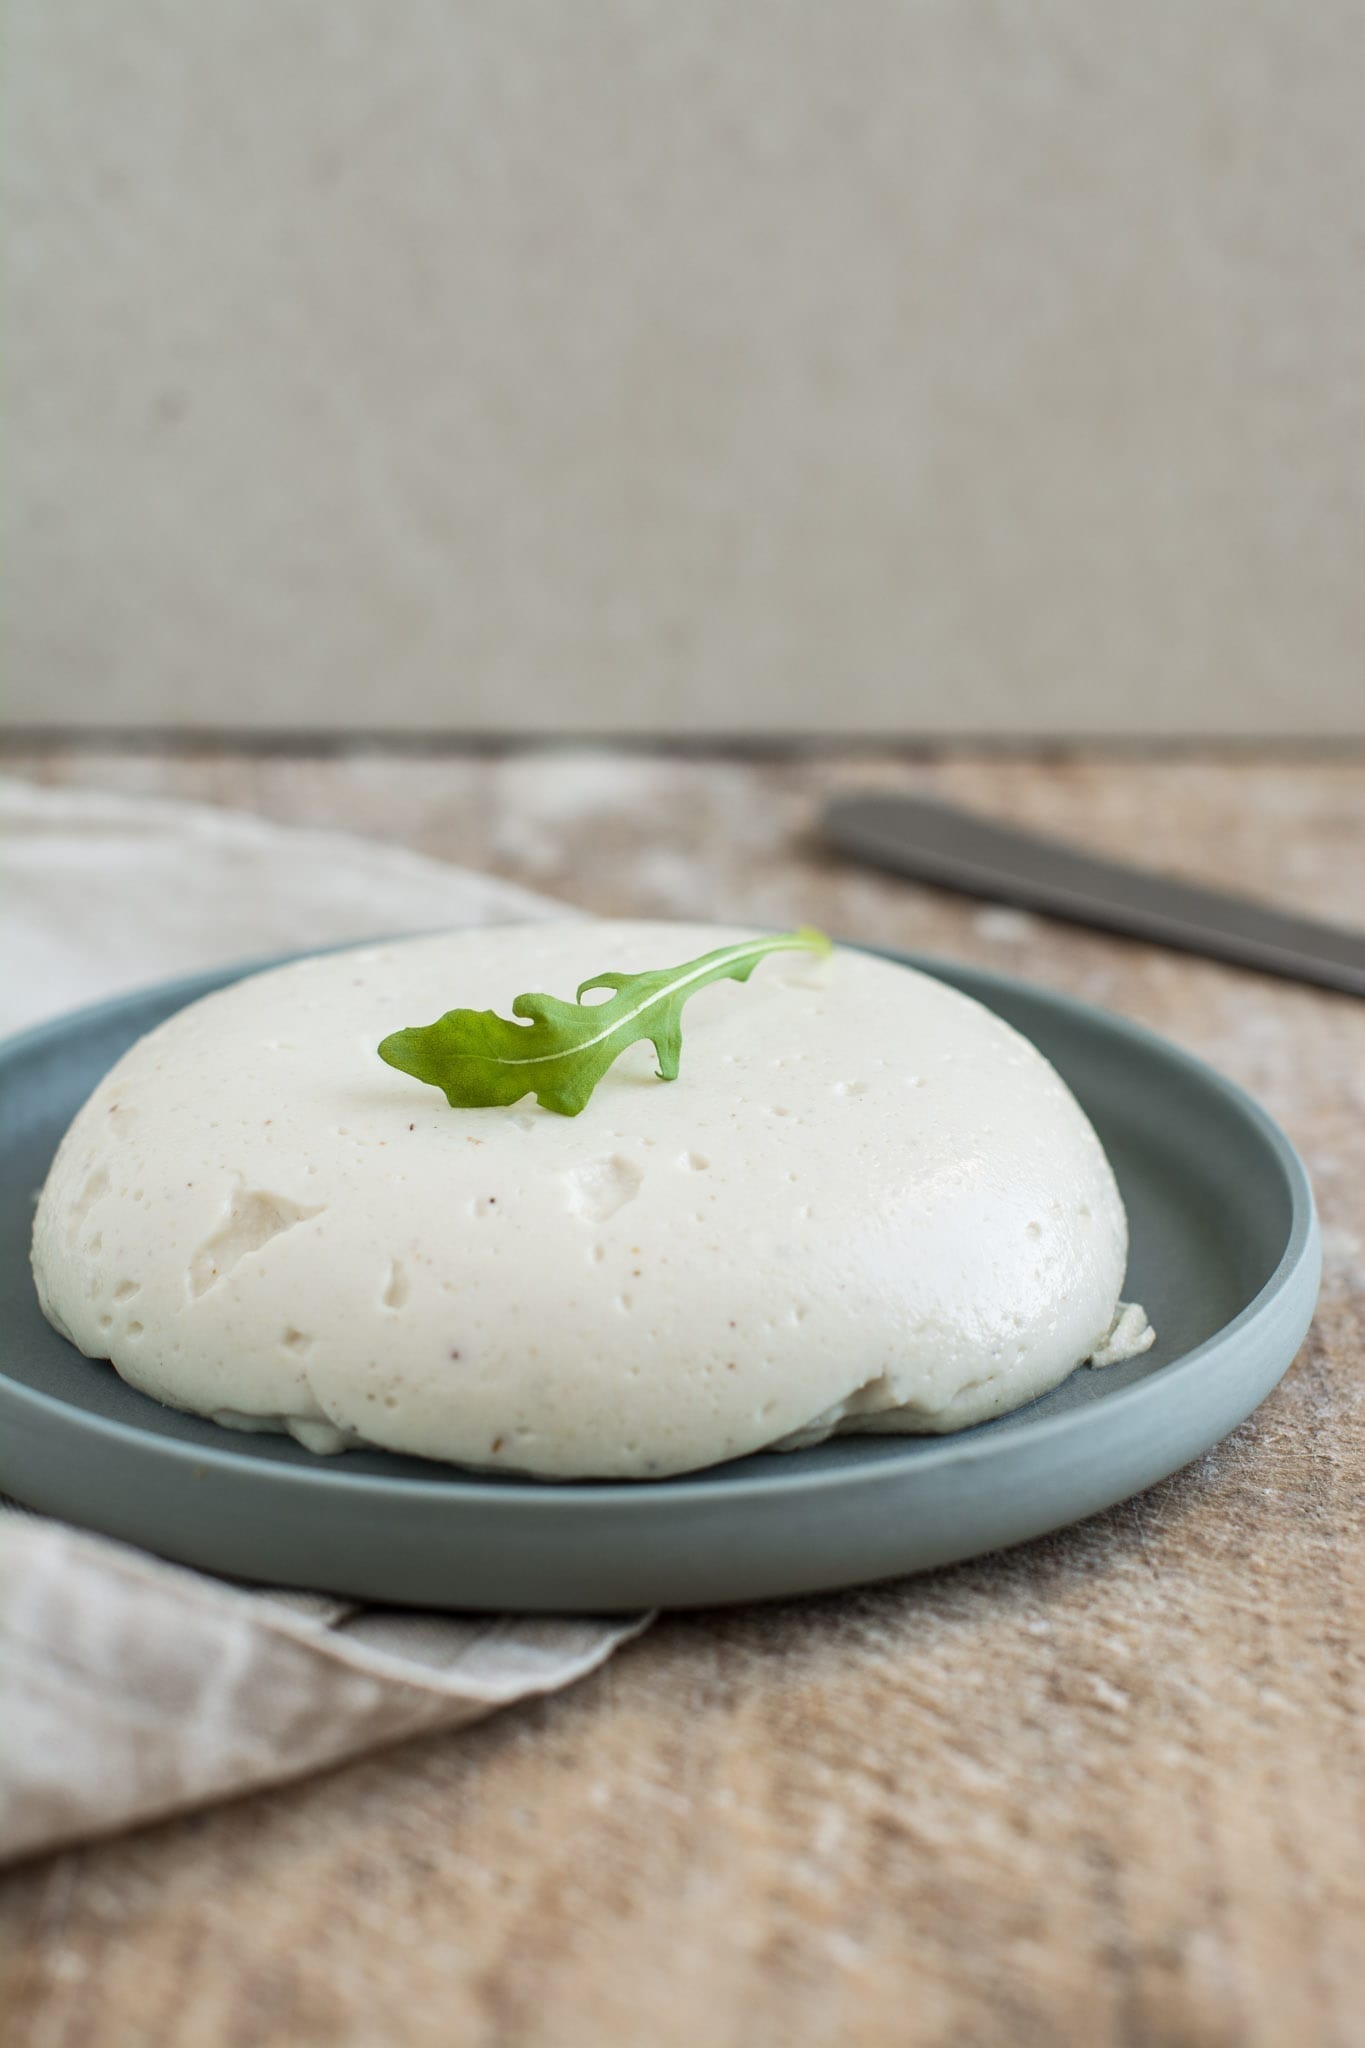 Cashew based vegan mozzarella cheese recipe that is oil-free and gluten-free yet so creamy, soft and tasty.